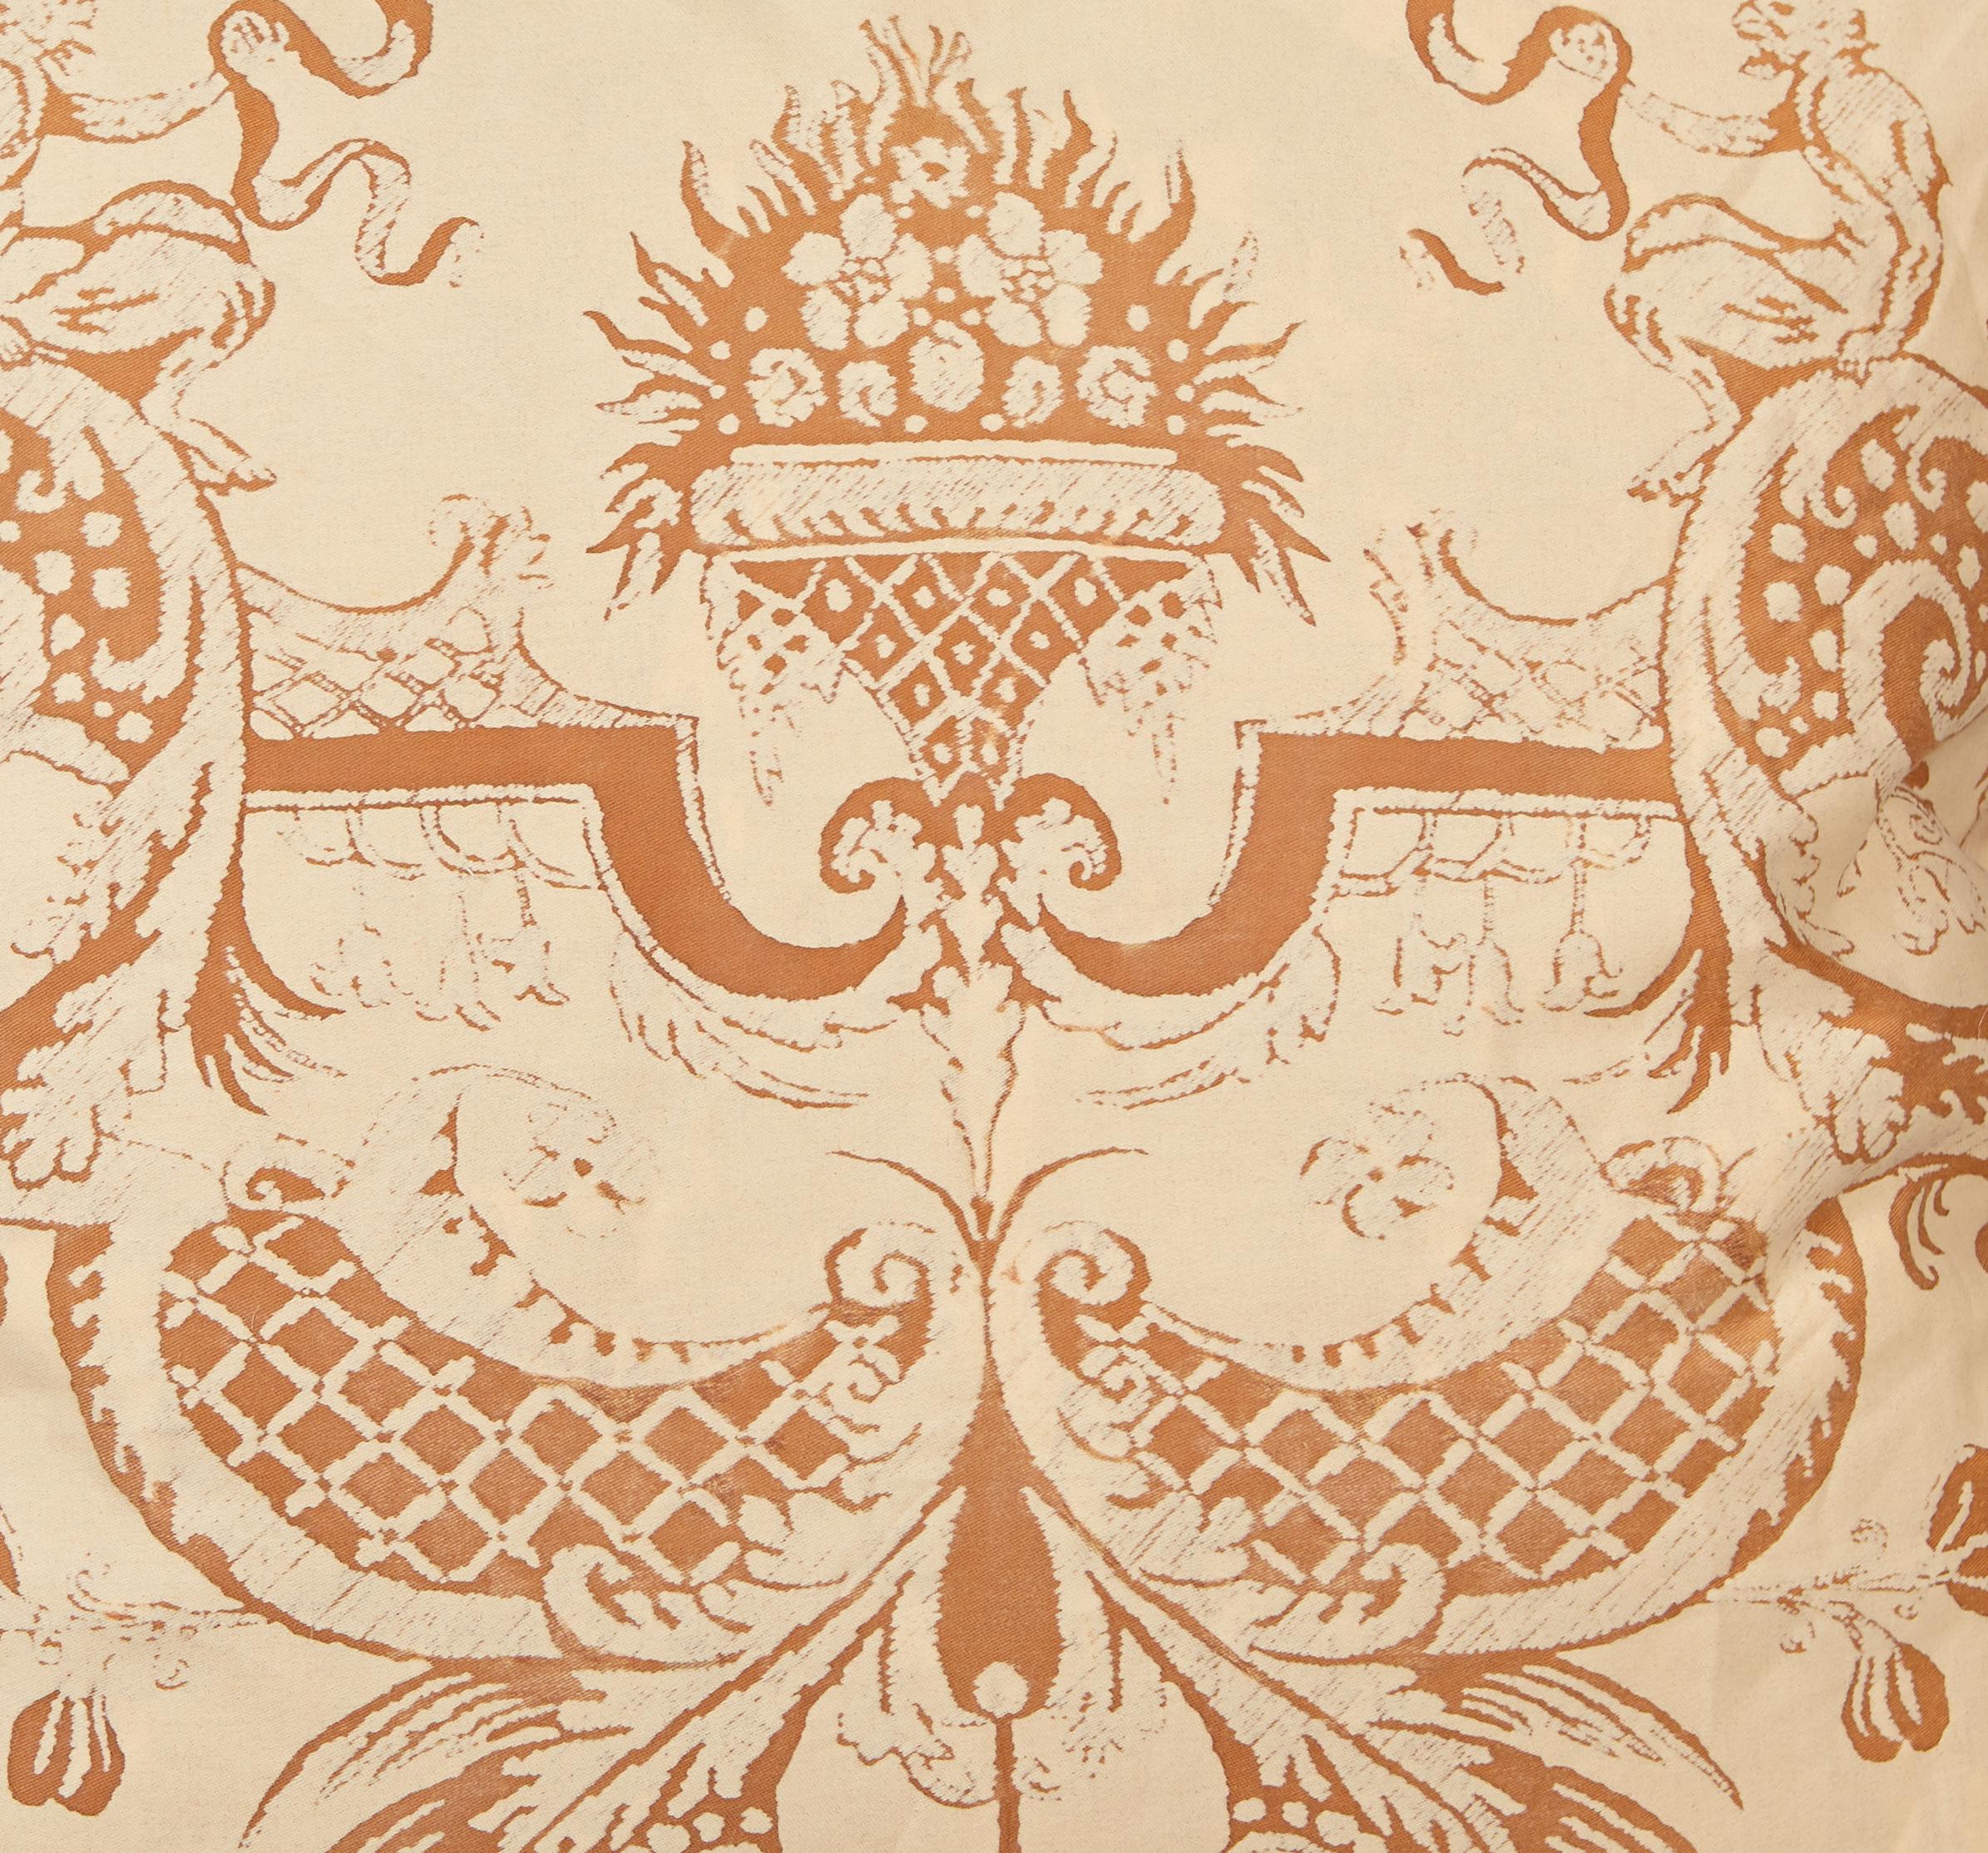 A pair of Fortuny fabric cushions in the Mazzarino print, rust and tan colorway with striped bias edging and tan backing. The Mazzarino the pattern is a 17th century French design named after Cardinal Mazarin at the Court of Louis XIII and Louis